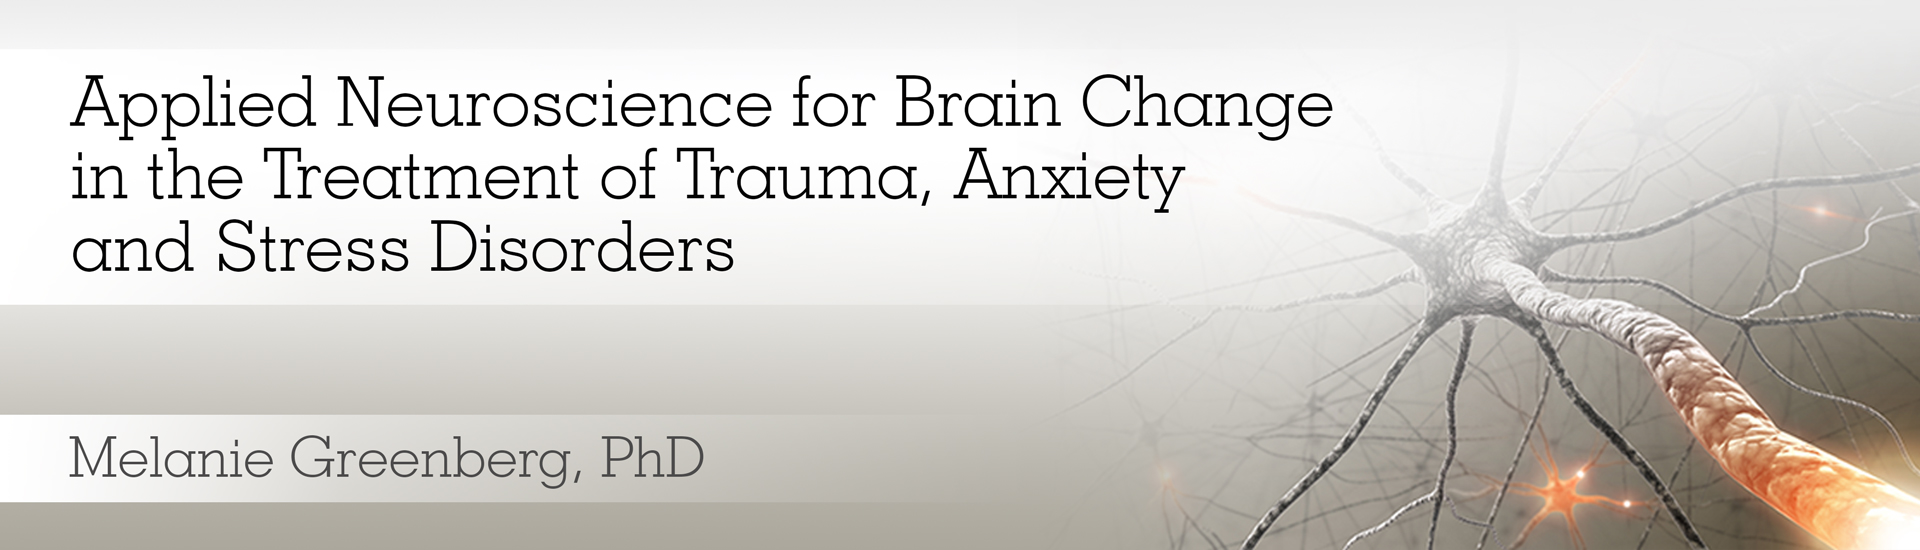 Applied Neuroscience for Brain Change in the Treatment of Trauma, Anxiety and Stress Disorders